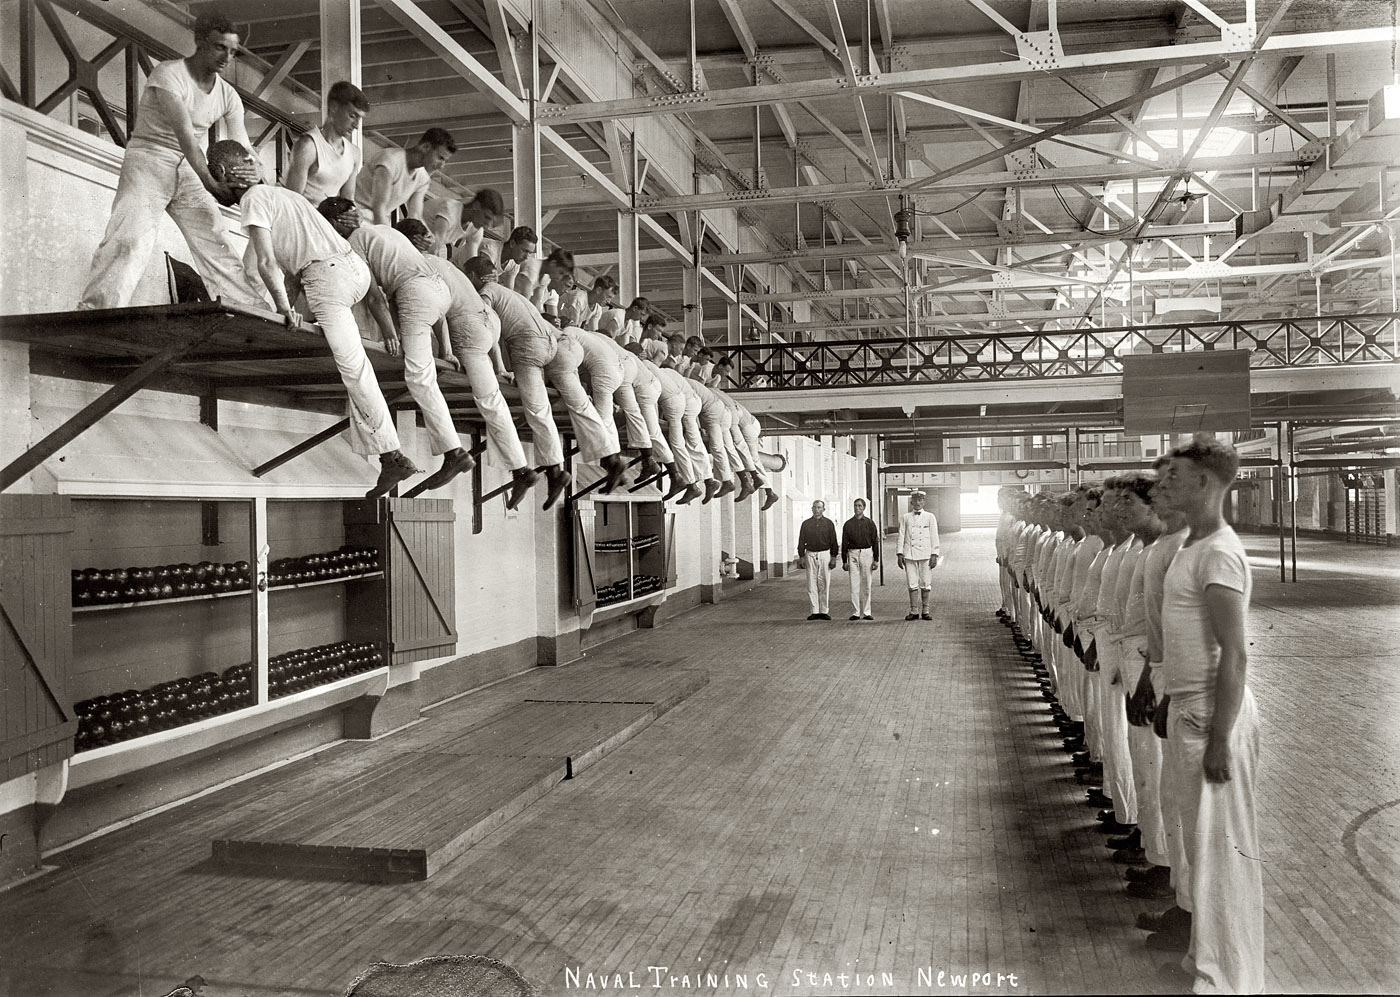 1913. "Naval Training Station at Newport, Rhode Island." View full size. National Photo Company Collection glass negative, Library of Congress.